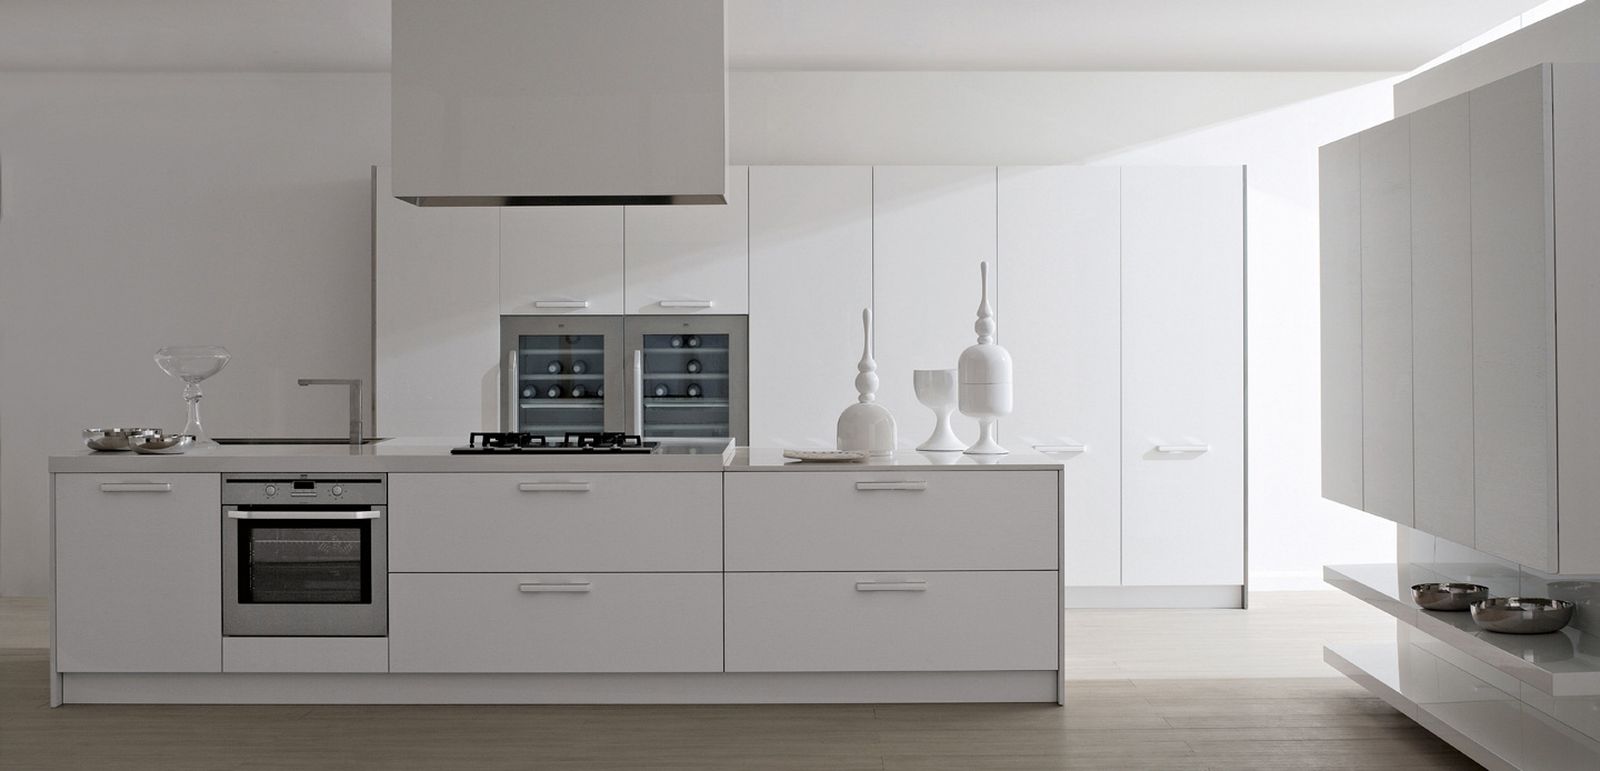 2015-modern-white-wood-kitchen-cabinets-decorating-ideas-with-white-lacquered-modern-contemporary-kitchen-design